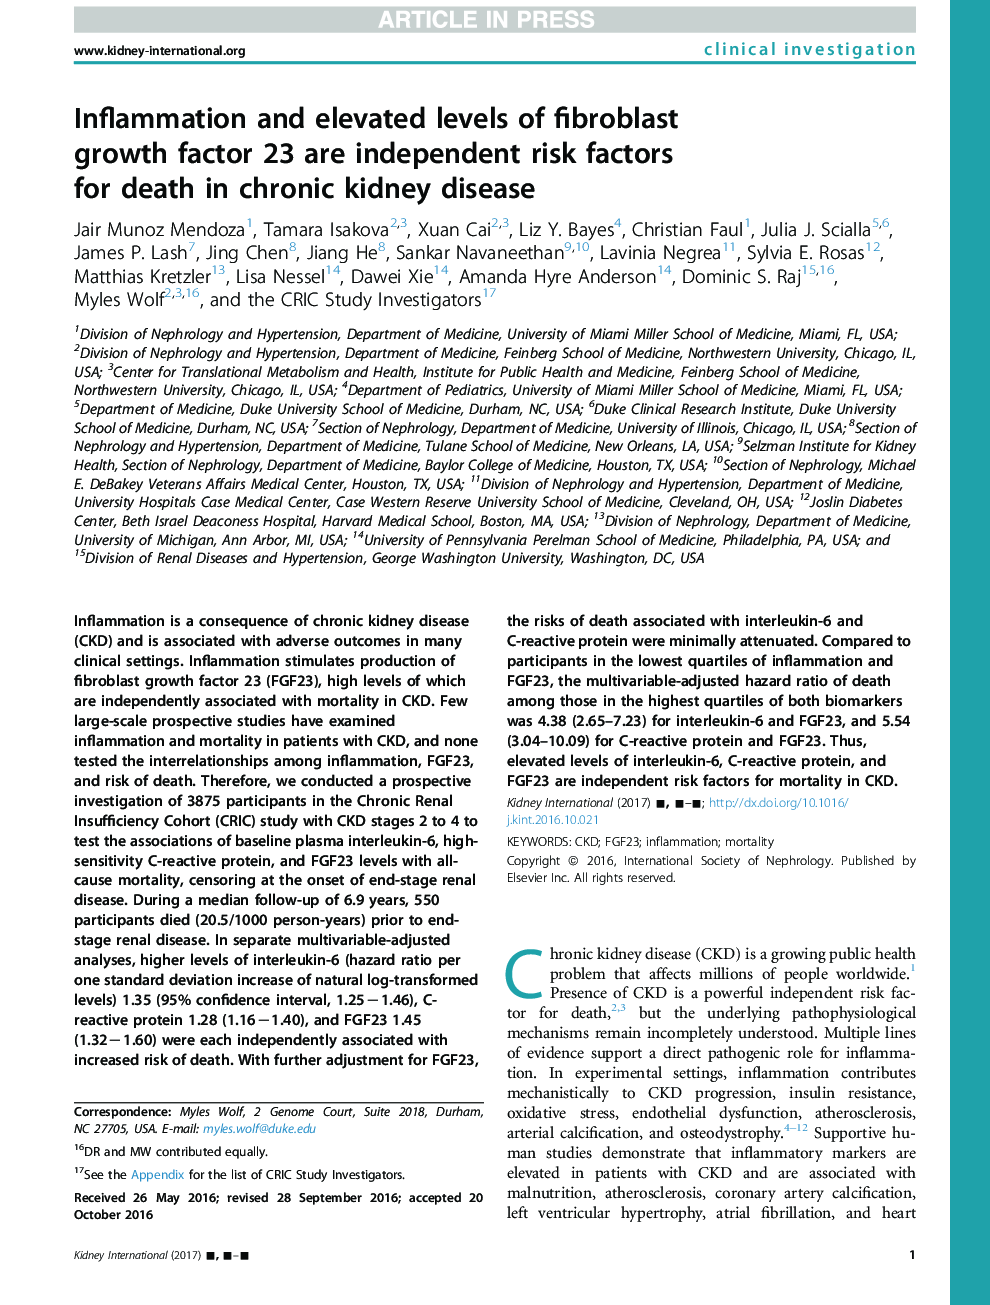 Inflammation and elevated levels of fibroblast growth factor 23 are independent risk factors forÂ death in chronic kidney disease